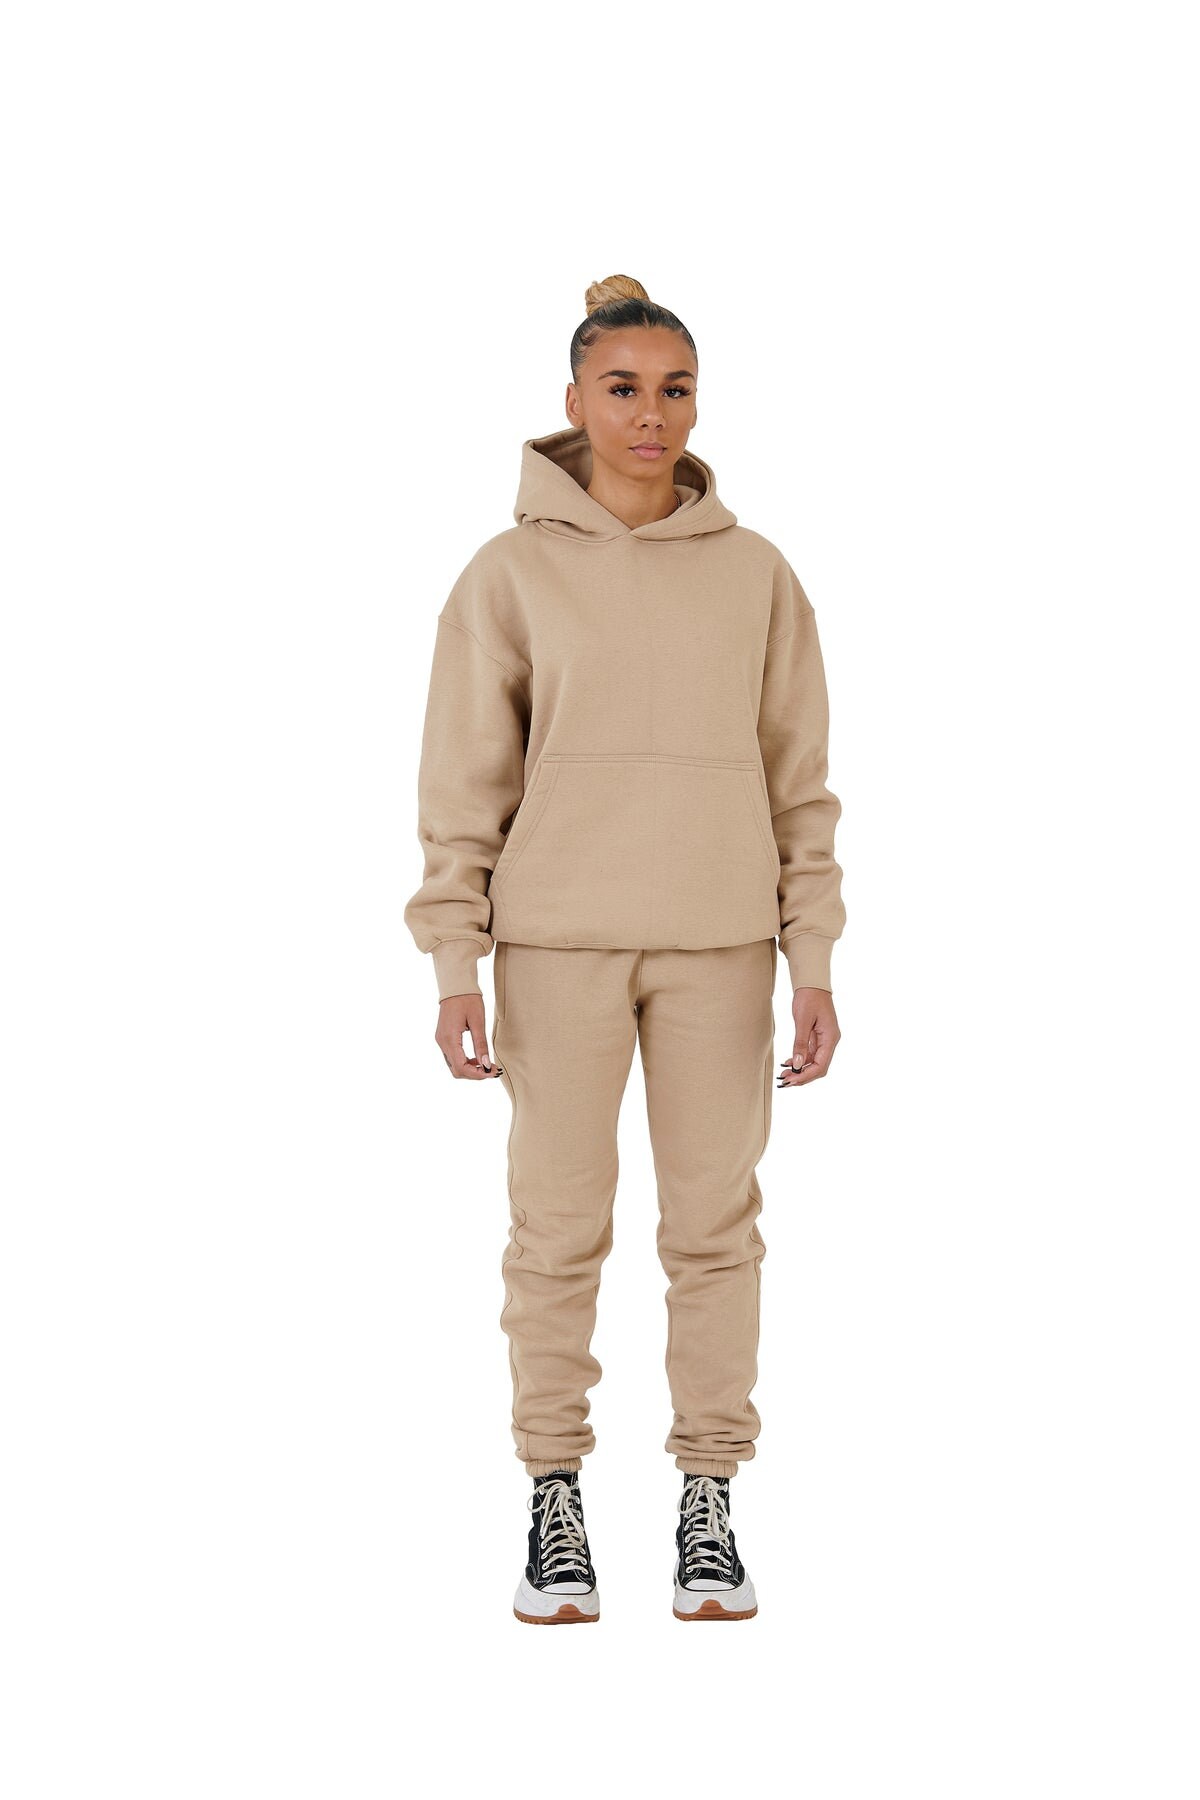 Buy Cheap Louis Vuitton tracksuits for Men long tracksuits #9999928095 from